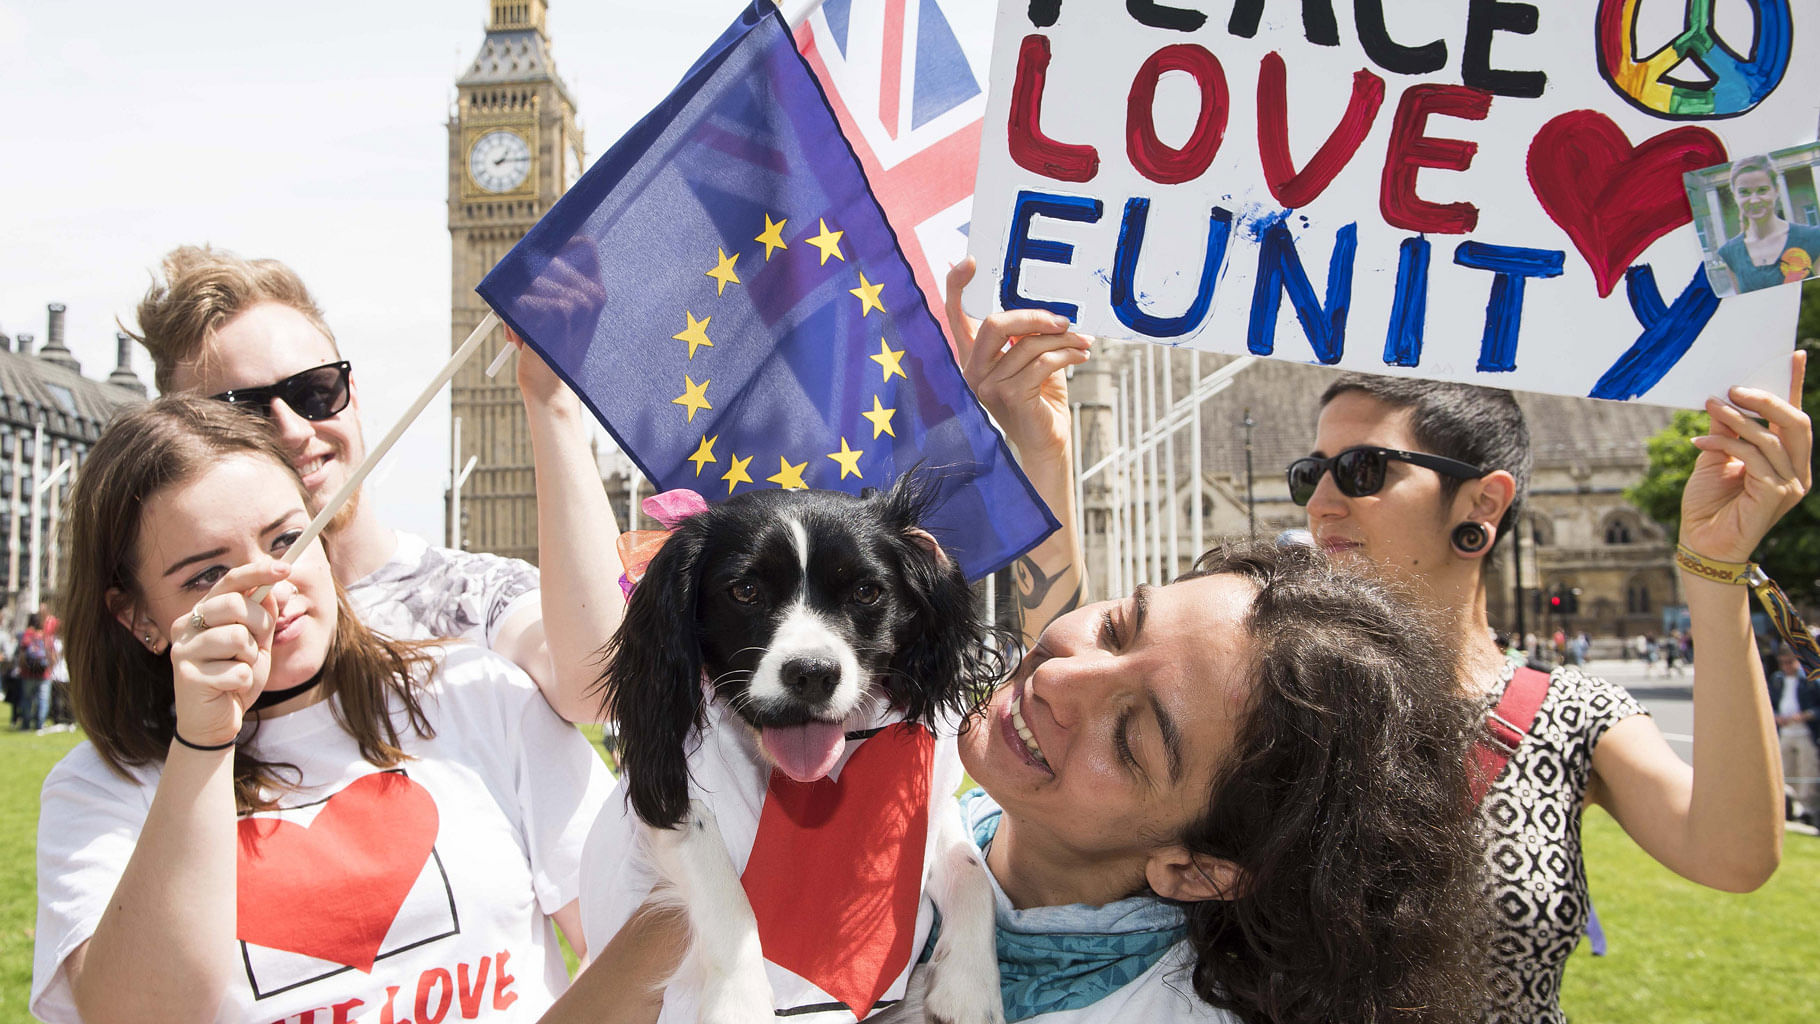 People gather to spread peace, love and unity ahead of the brexit vote. (Photo: AP)